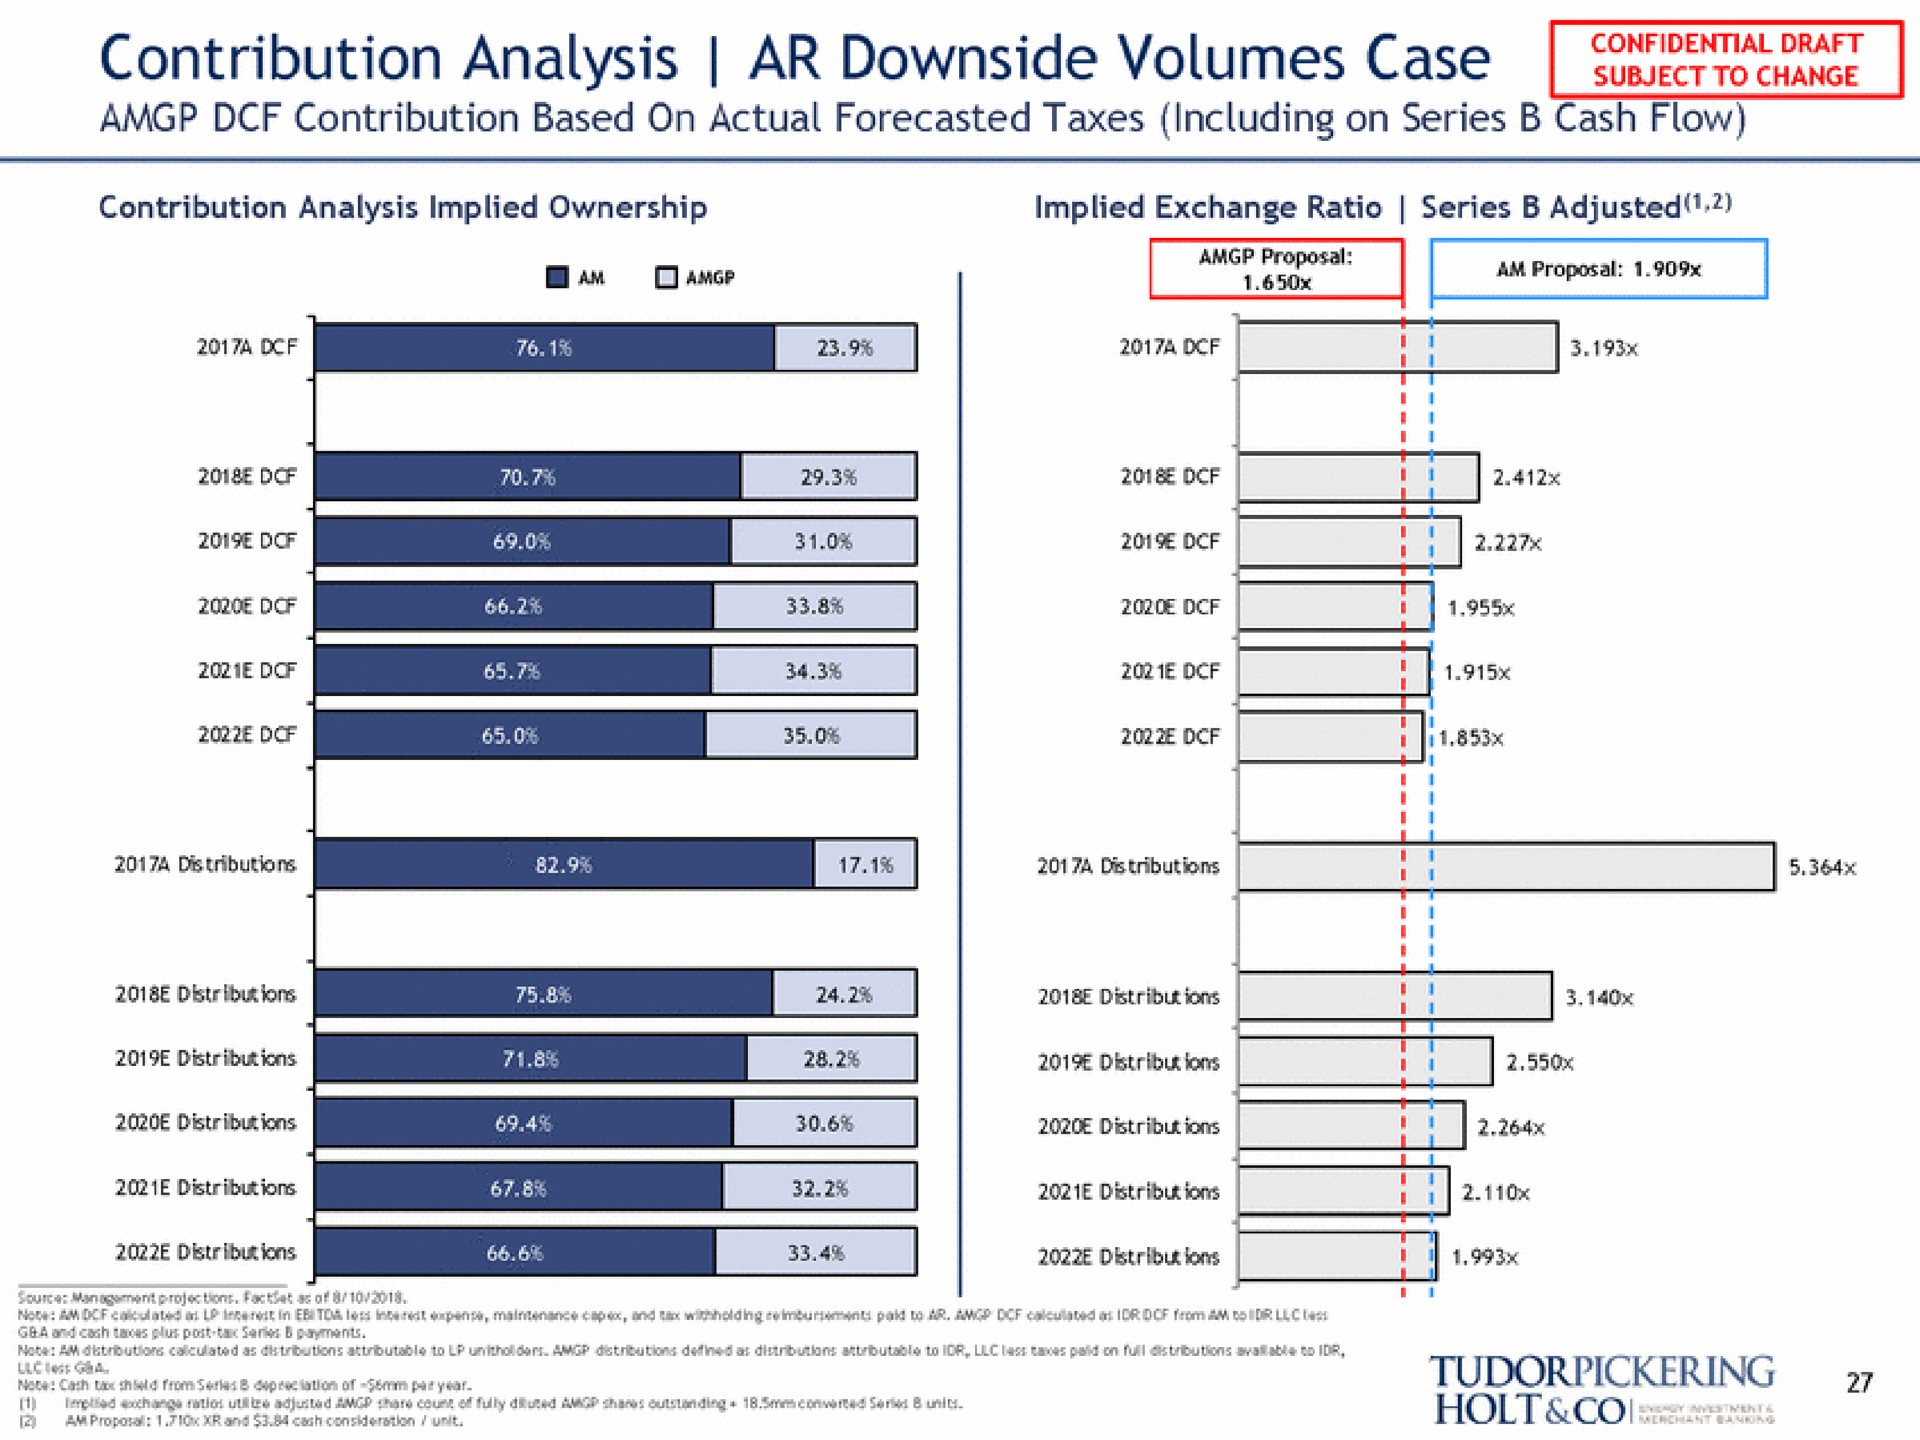 contribution analysis downside volumes case nome | Tudor, Pickering, Holt & Co